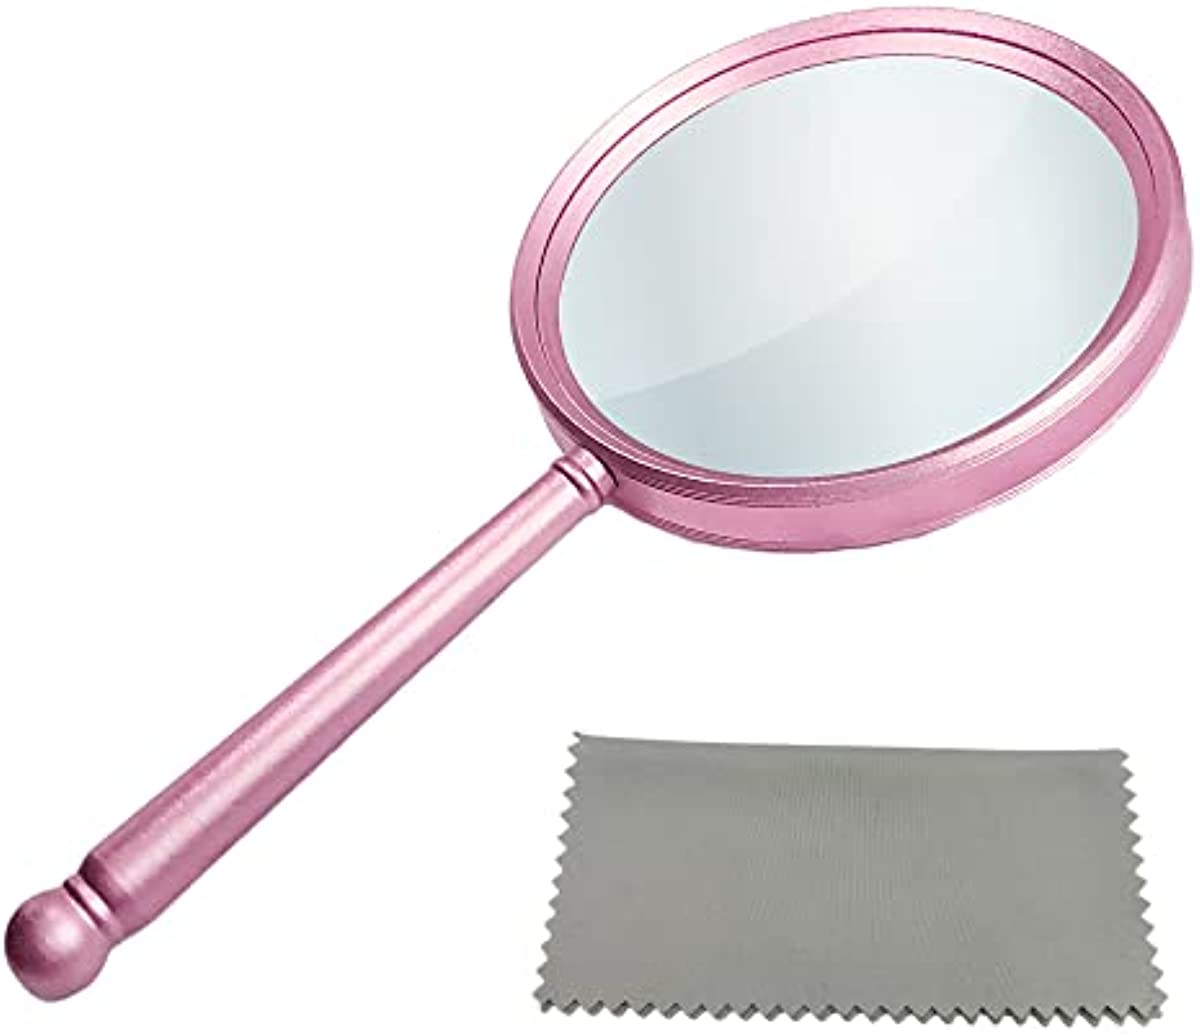 HOPLEX Handheld Magnifying Glasses 5X Reading Magnifier with Shatterproof Metal Handle & 84mm Large Magnifying Real Glass Lens for Seniors and Kids Repair and Observation(Rose Gold)